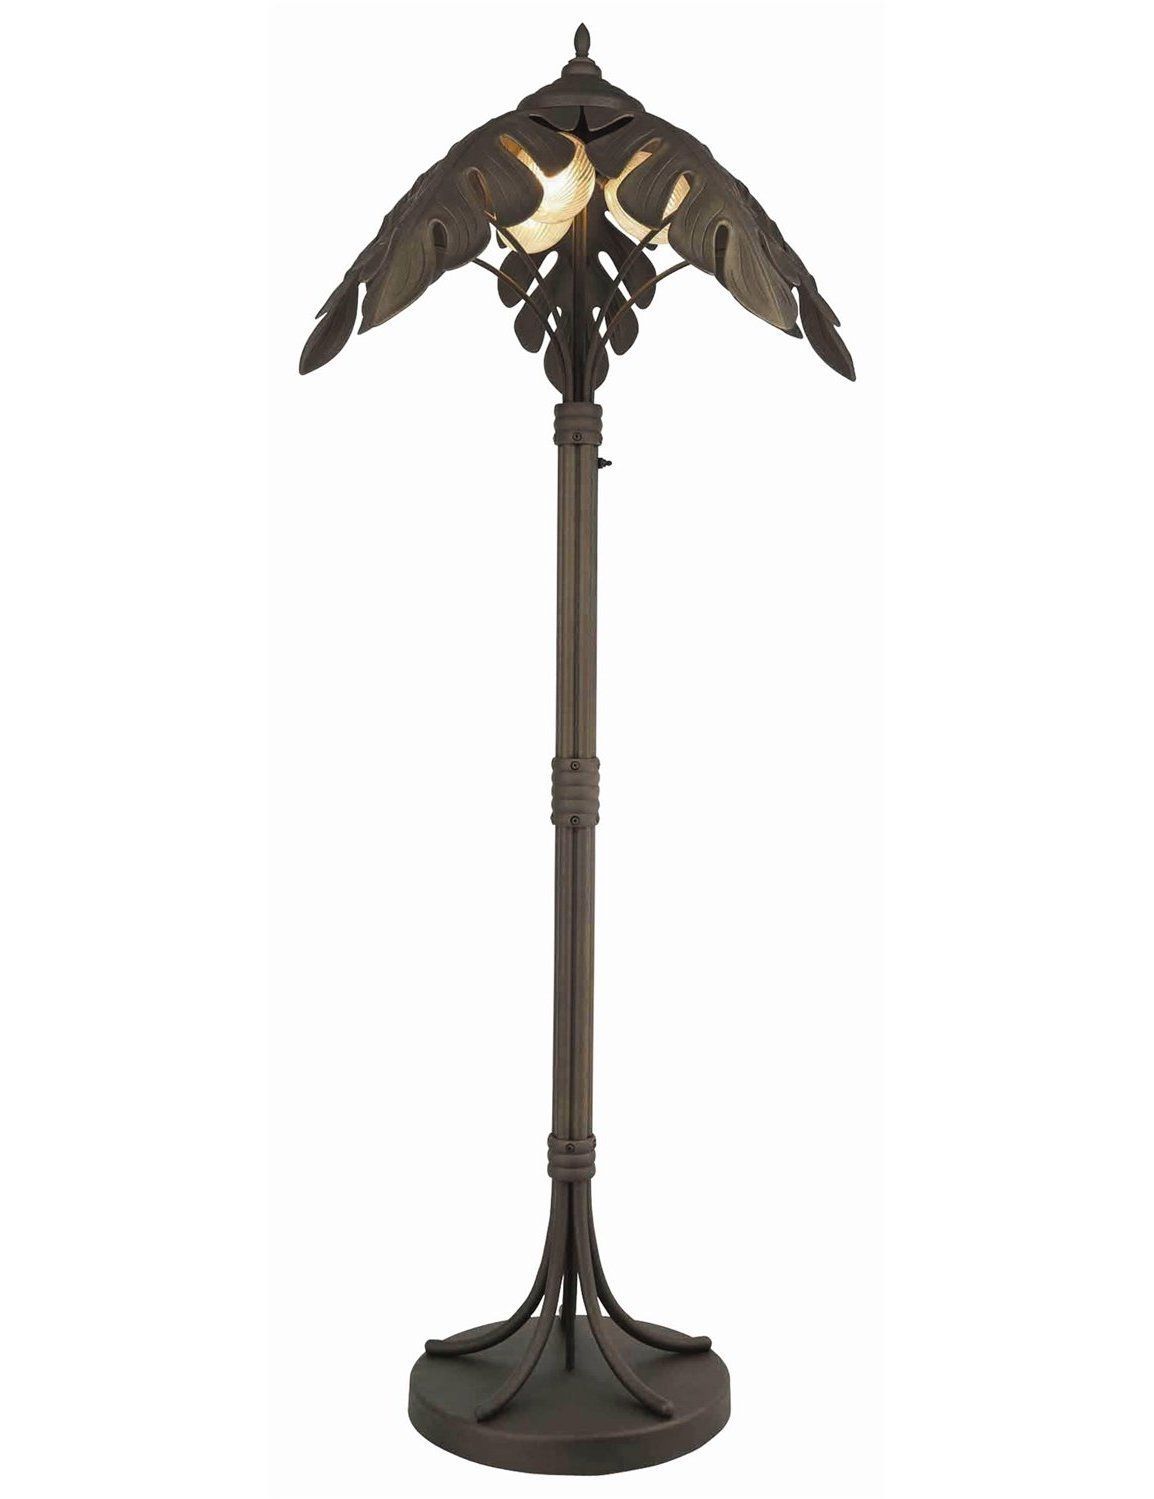 Cast Iron Outdoor Palm Tree Lamp Post Light Floor Lamp Garden With Outdoor Cast Iron Lanterns (View 14 of 20)